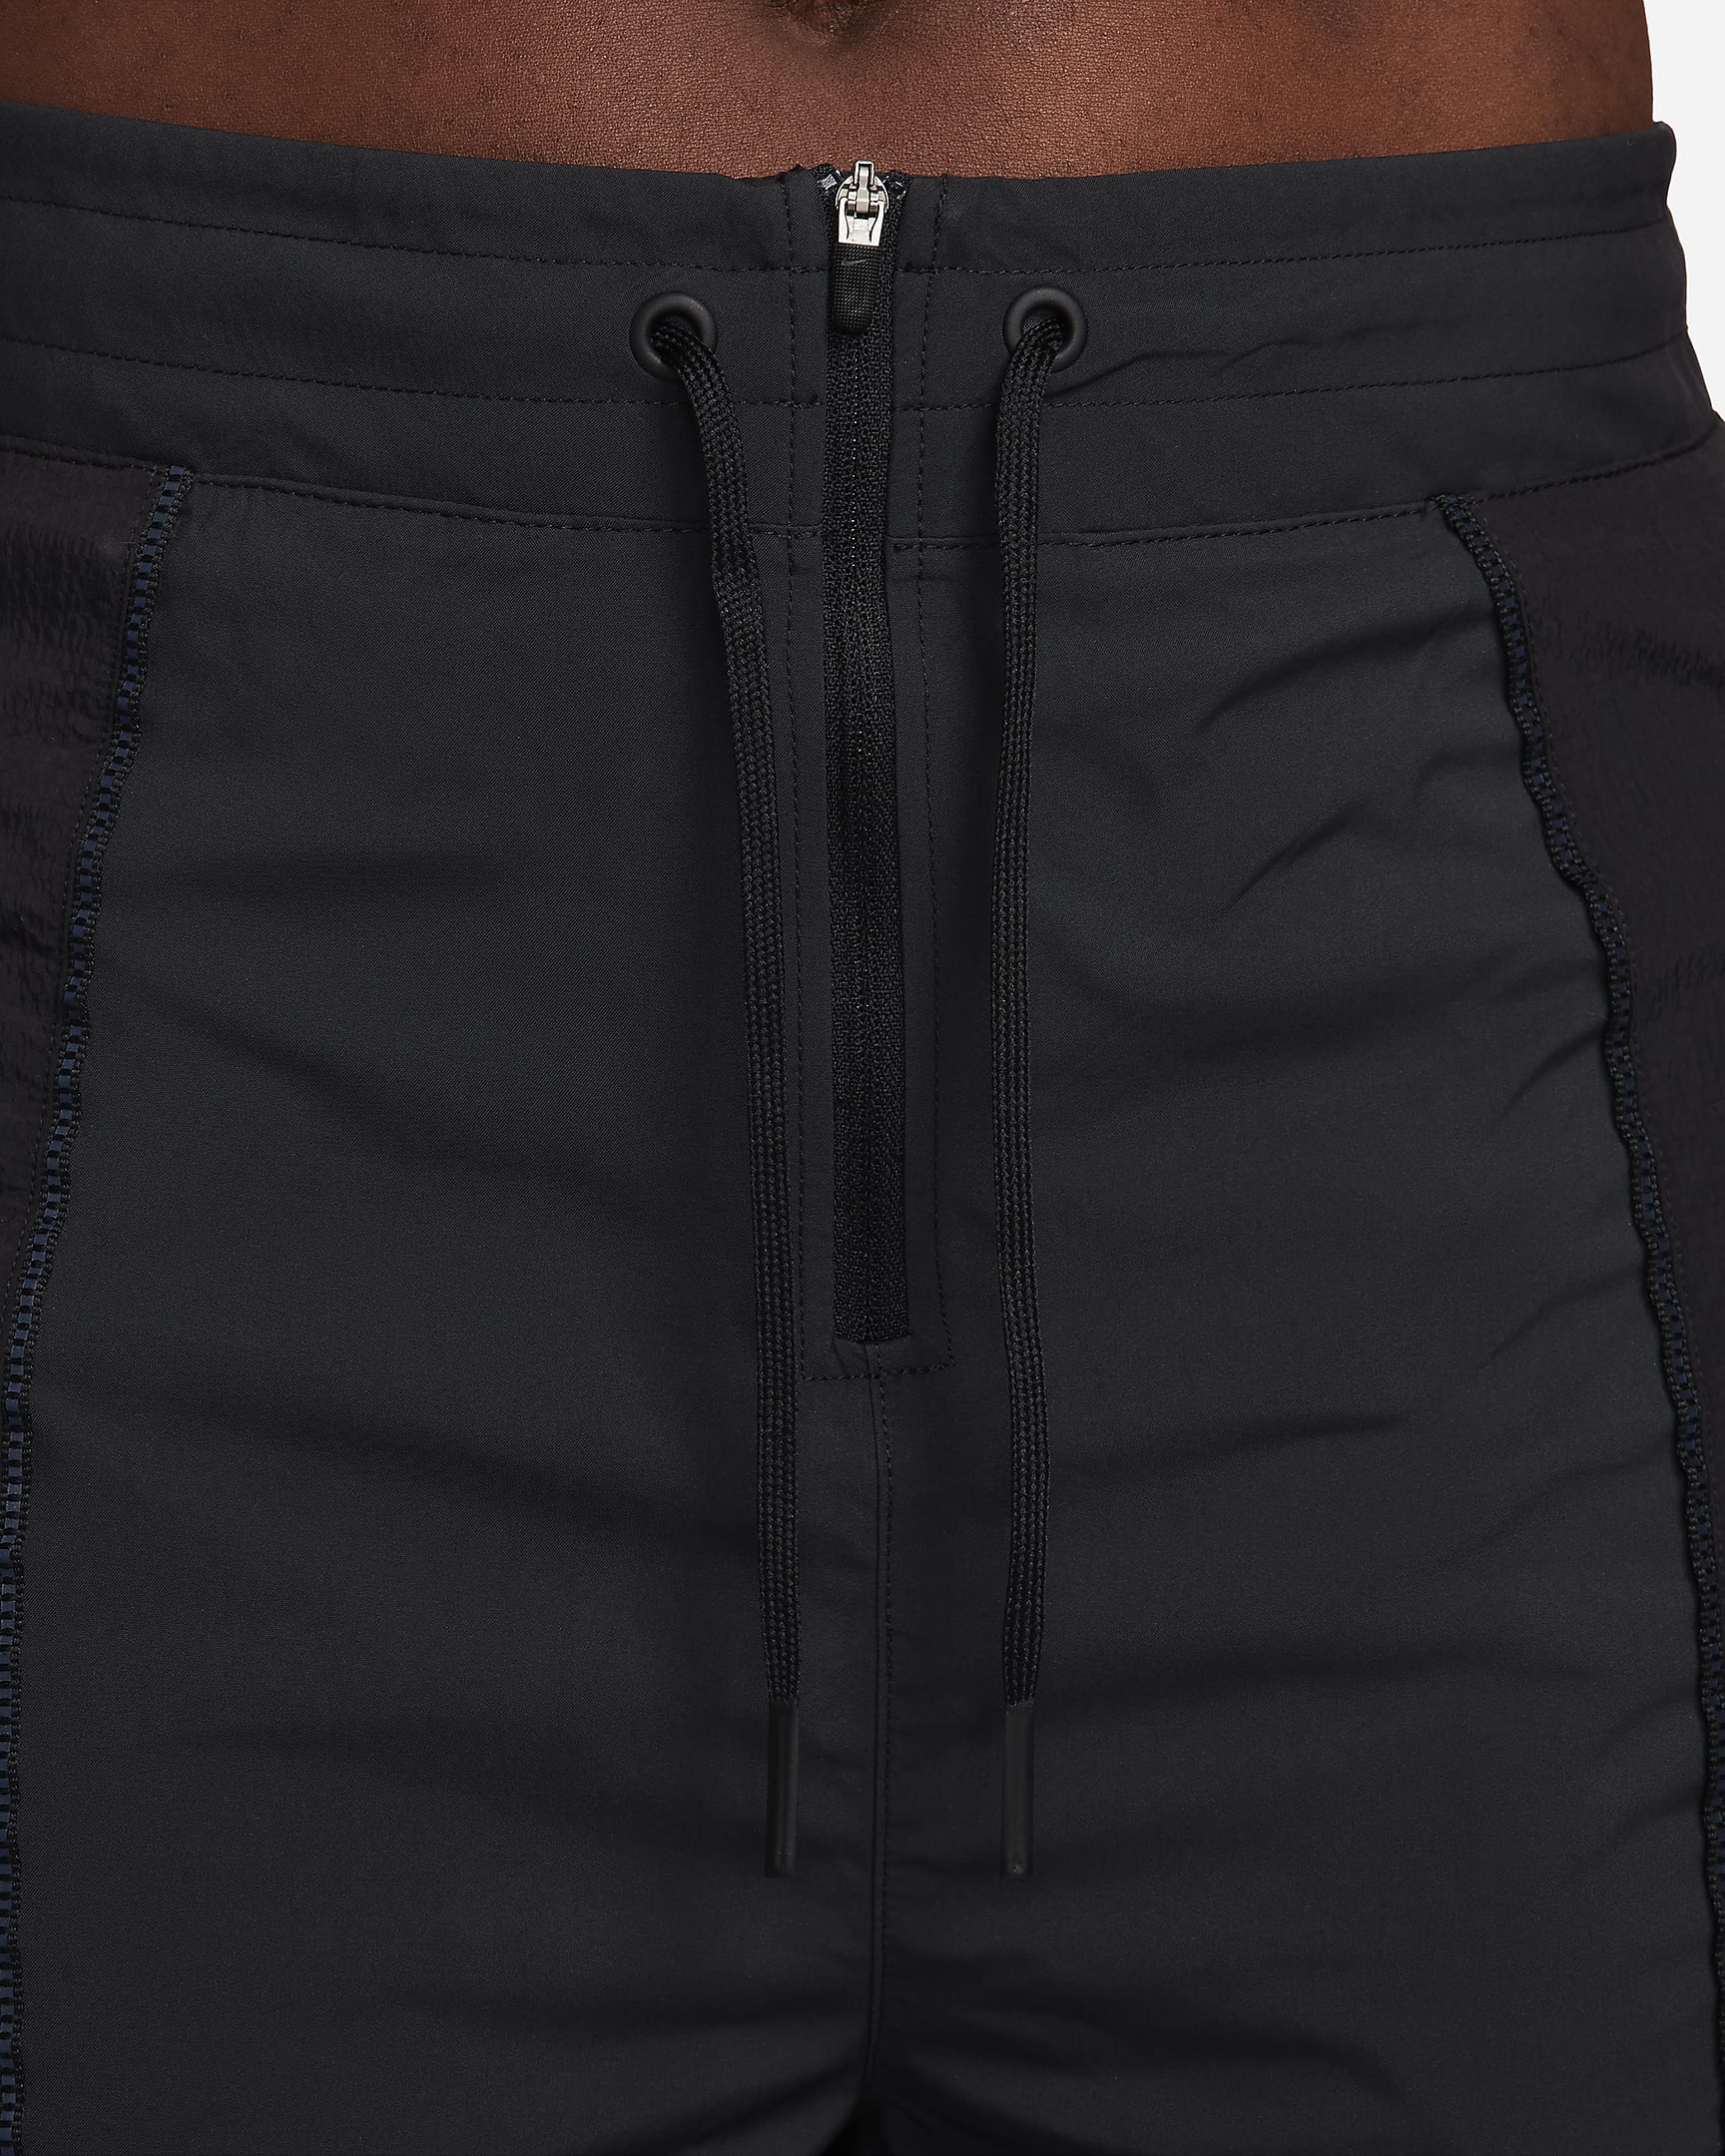 Nike Repel Running Division Women's High-Waisted Pants. Nike.com